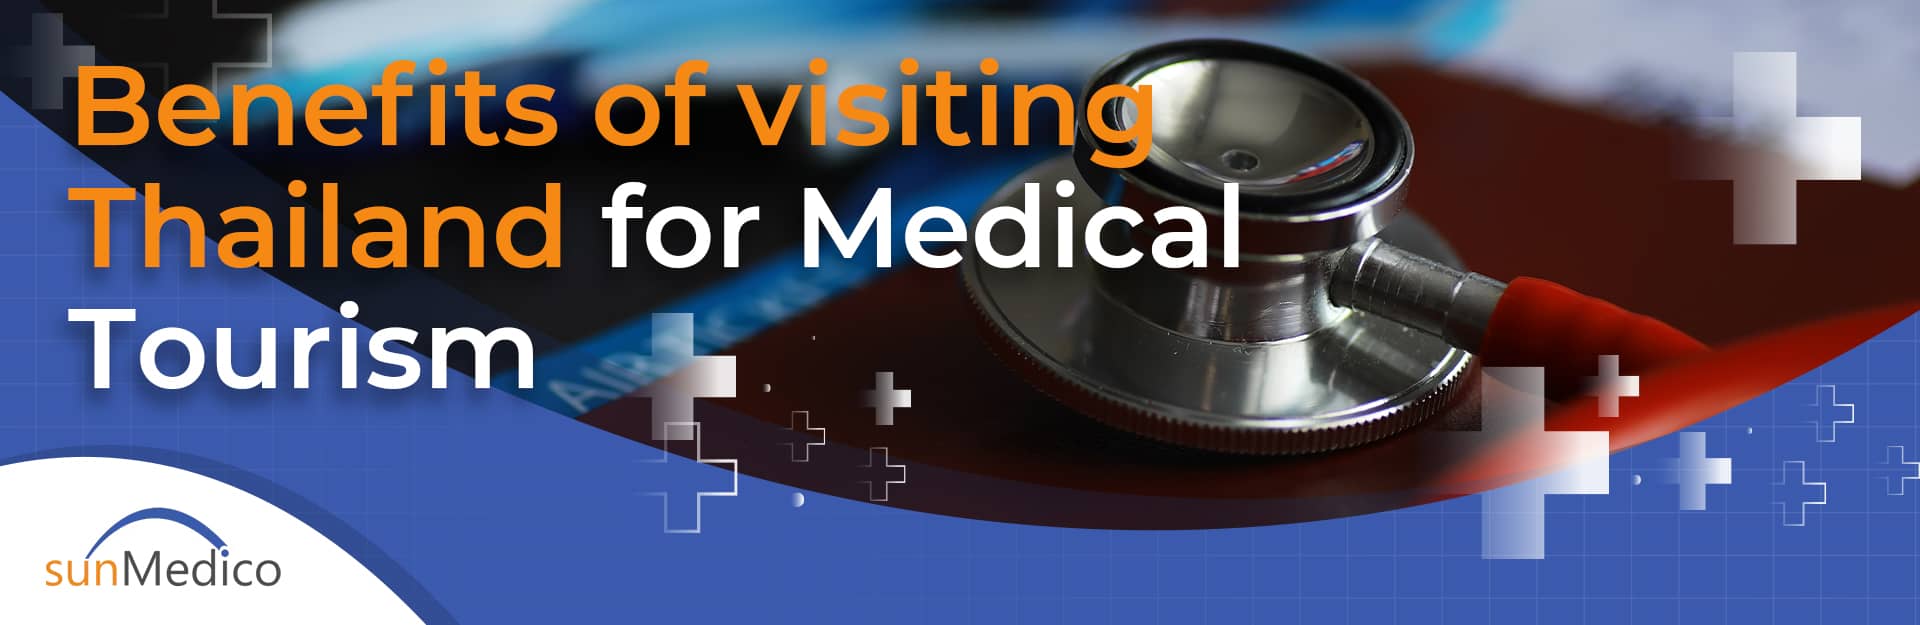 Benefits of visiting Thailand for Medical Tourism